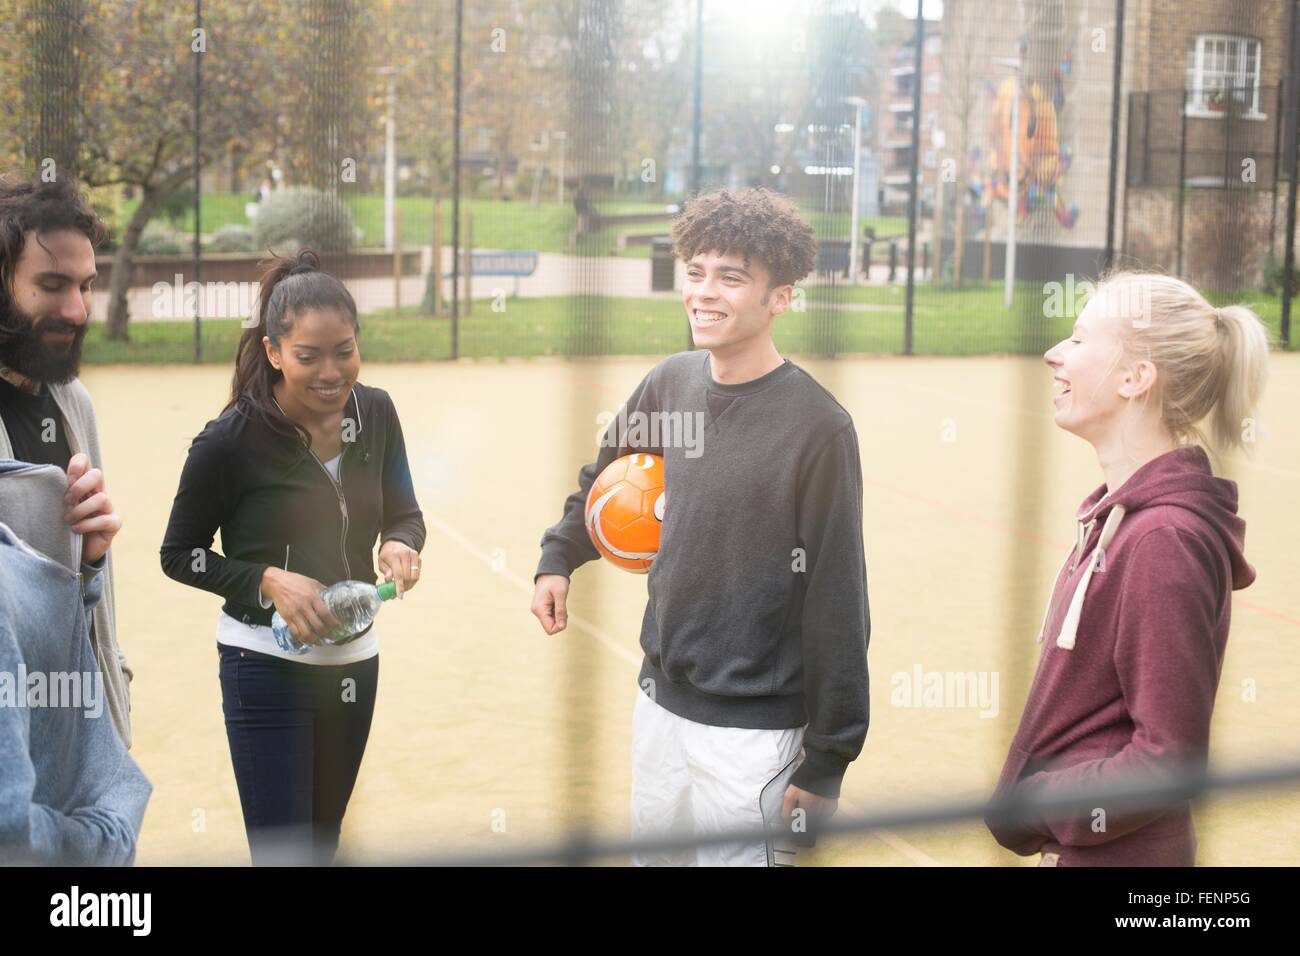 Group of adults standing on urban sports pitch, talking Stock Photo